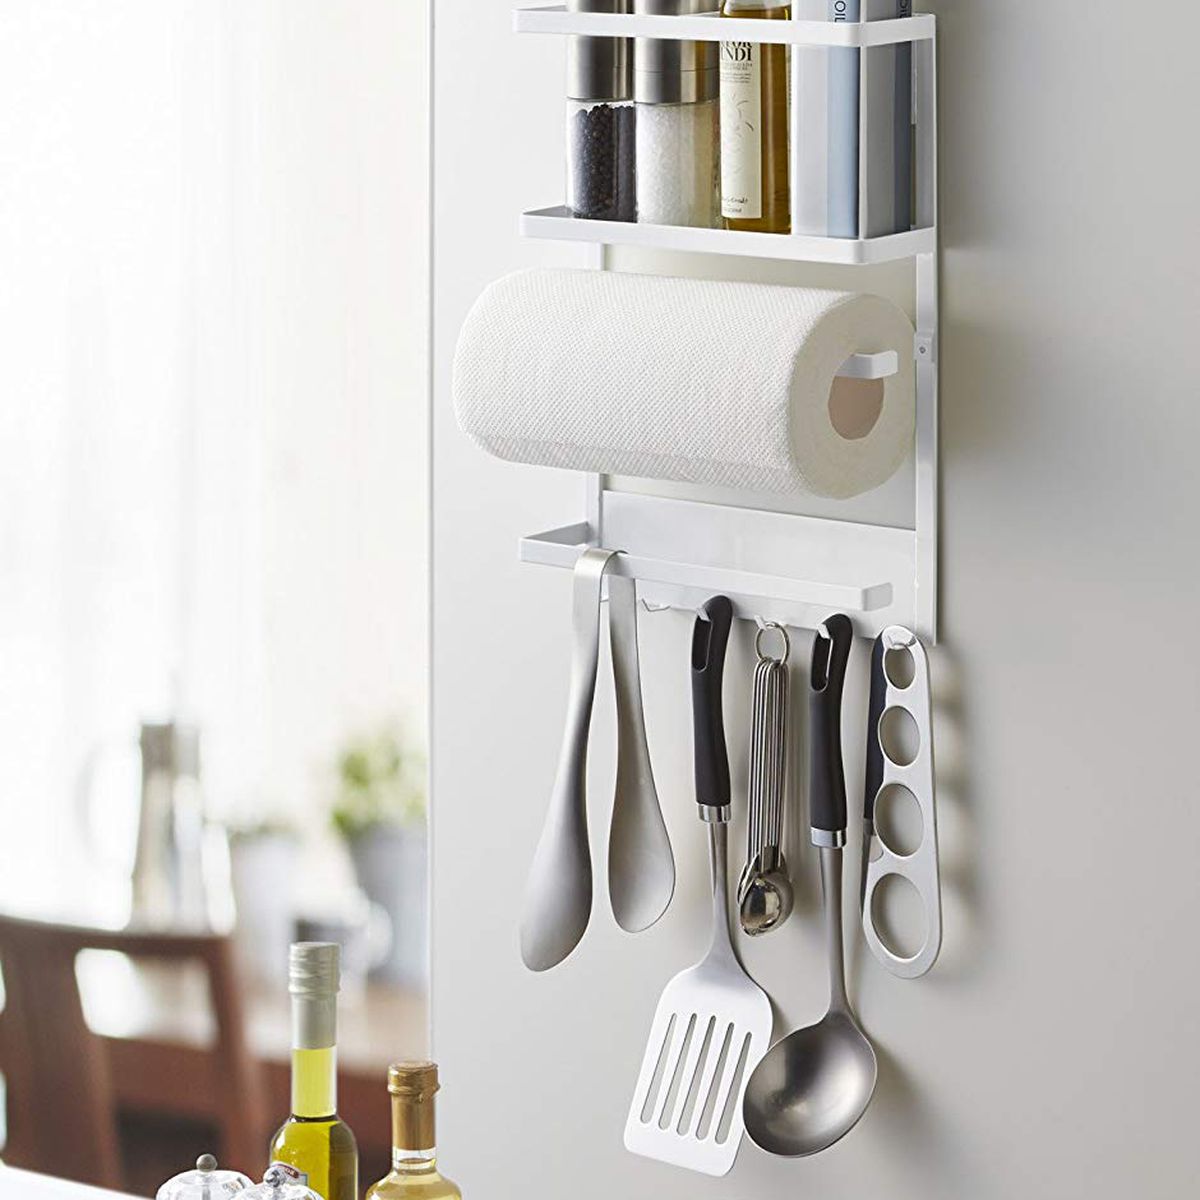 A white kitchen organization rack holds hanging cooking tools, paper towels, and salt and pepper. It’s magnetic and stuck on the side of a fridge.